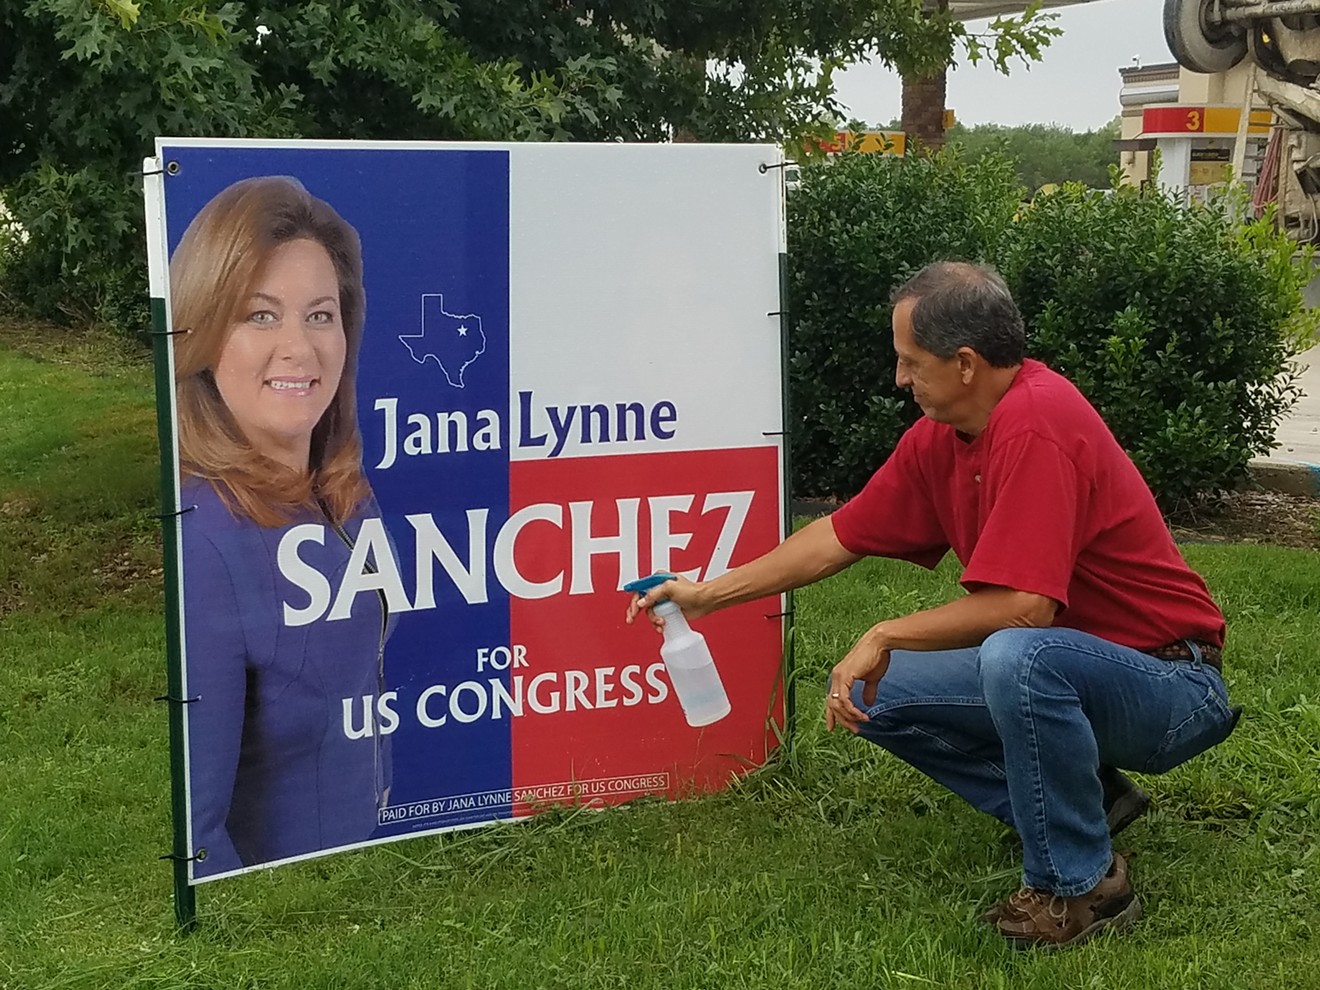 Anthony Arredondo, retired Dallas firefighter and volunteer for Sanchez's campaign, spraying skunk essence on one of the campaign signs.